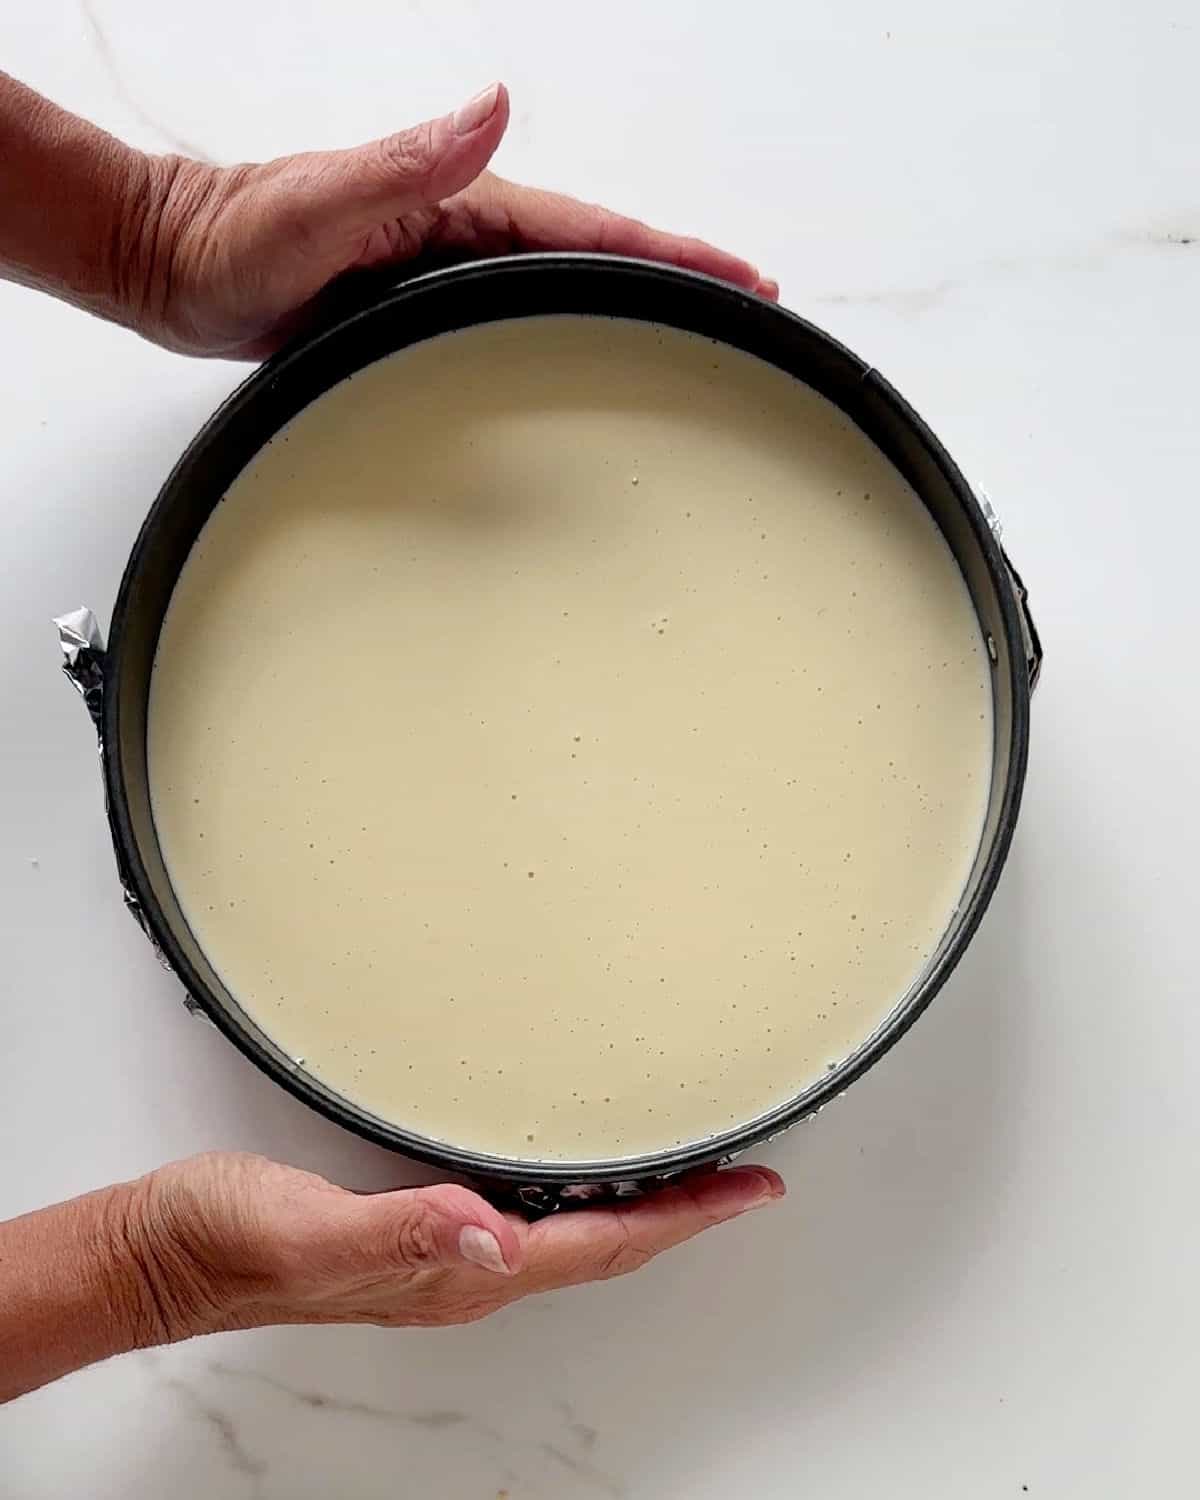 Hands holding a round cake pan with ricotta cheesecake filling before baking. White marble surface. 